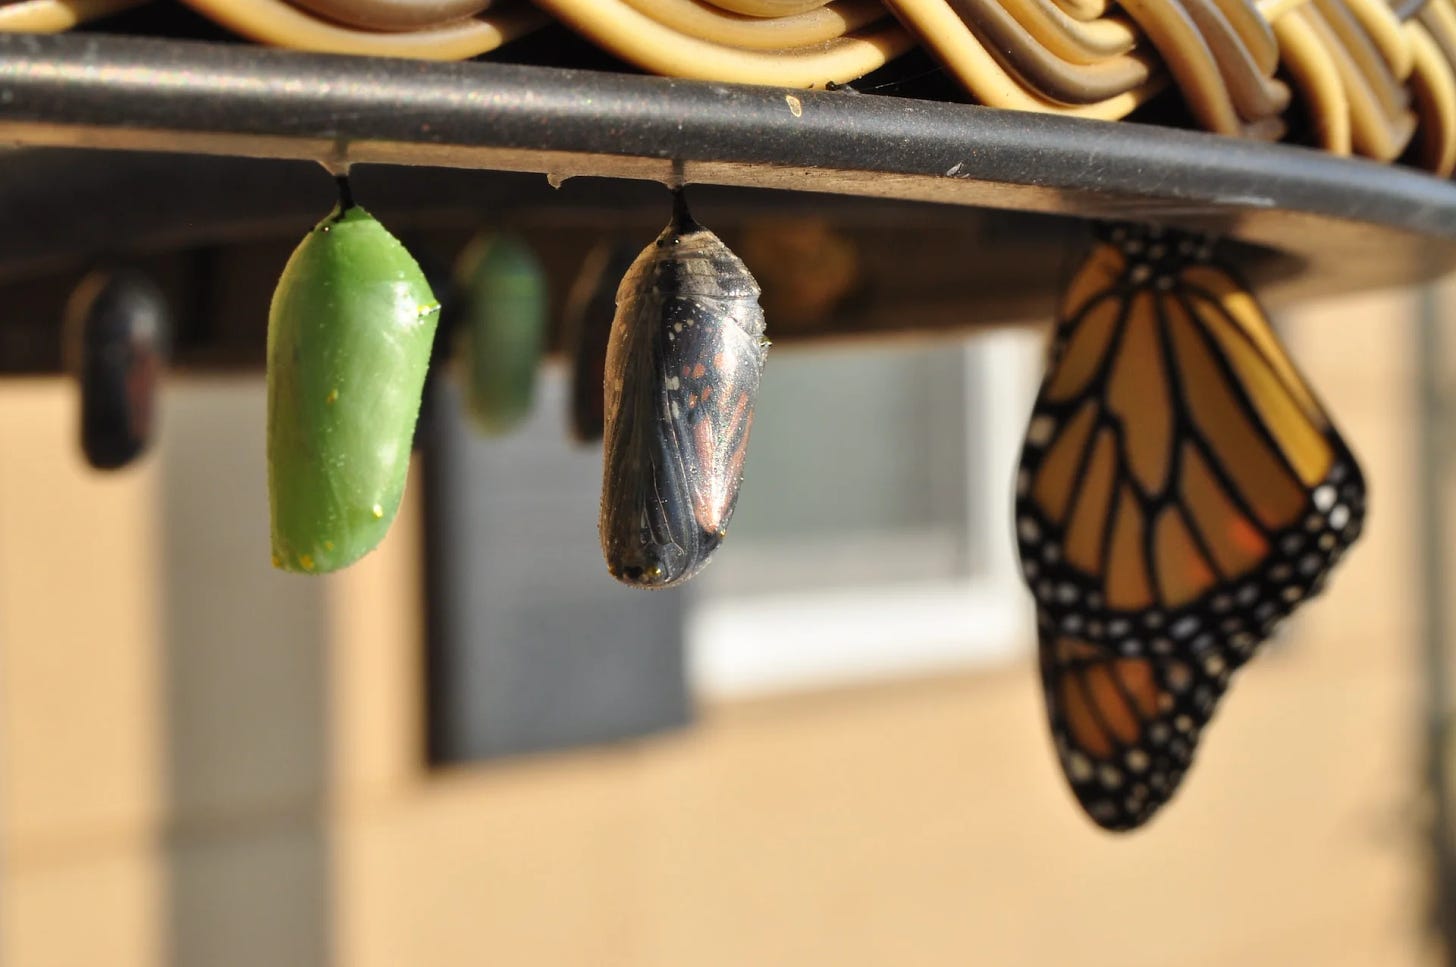 Chrysalis to butterfly in stages.